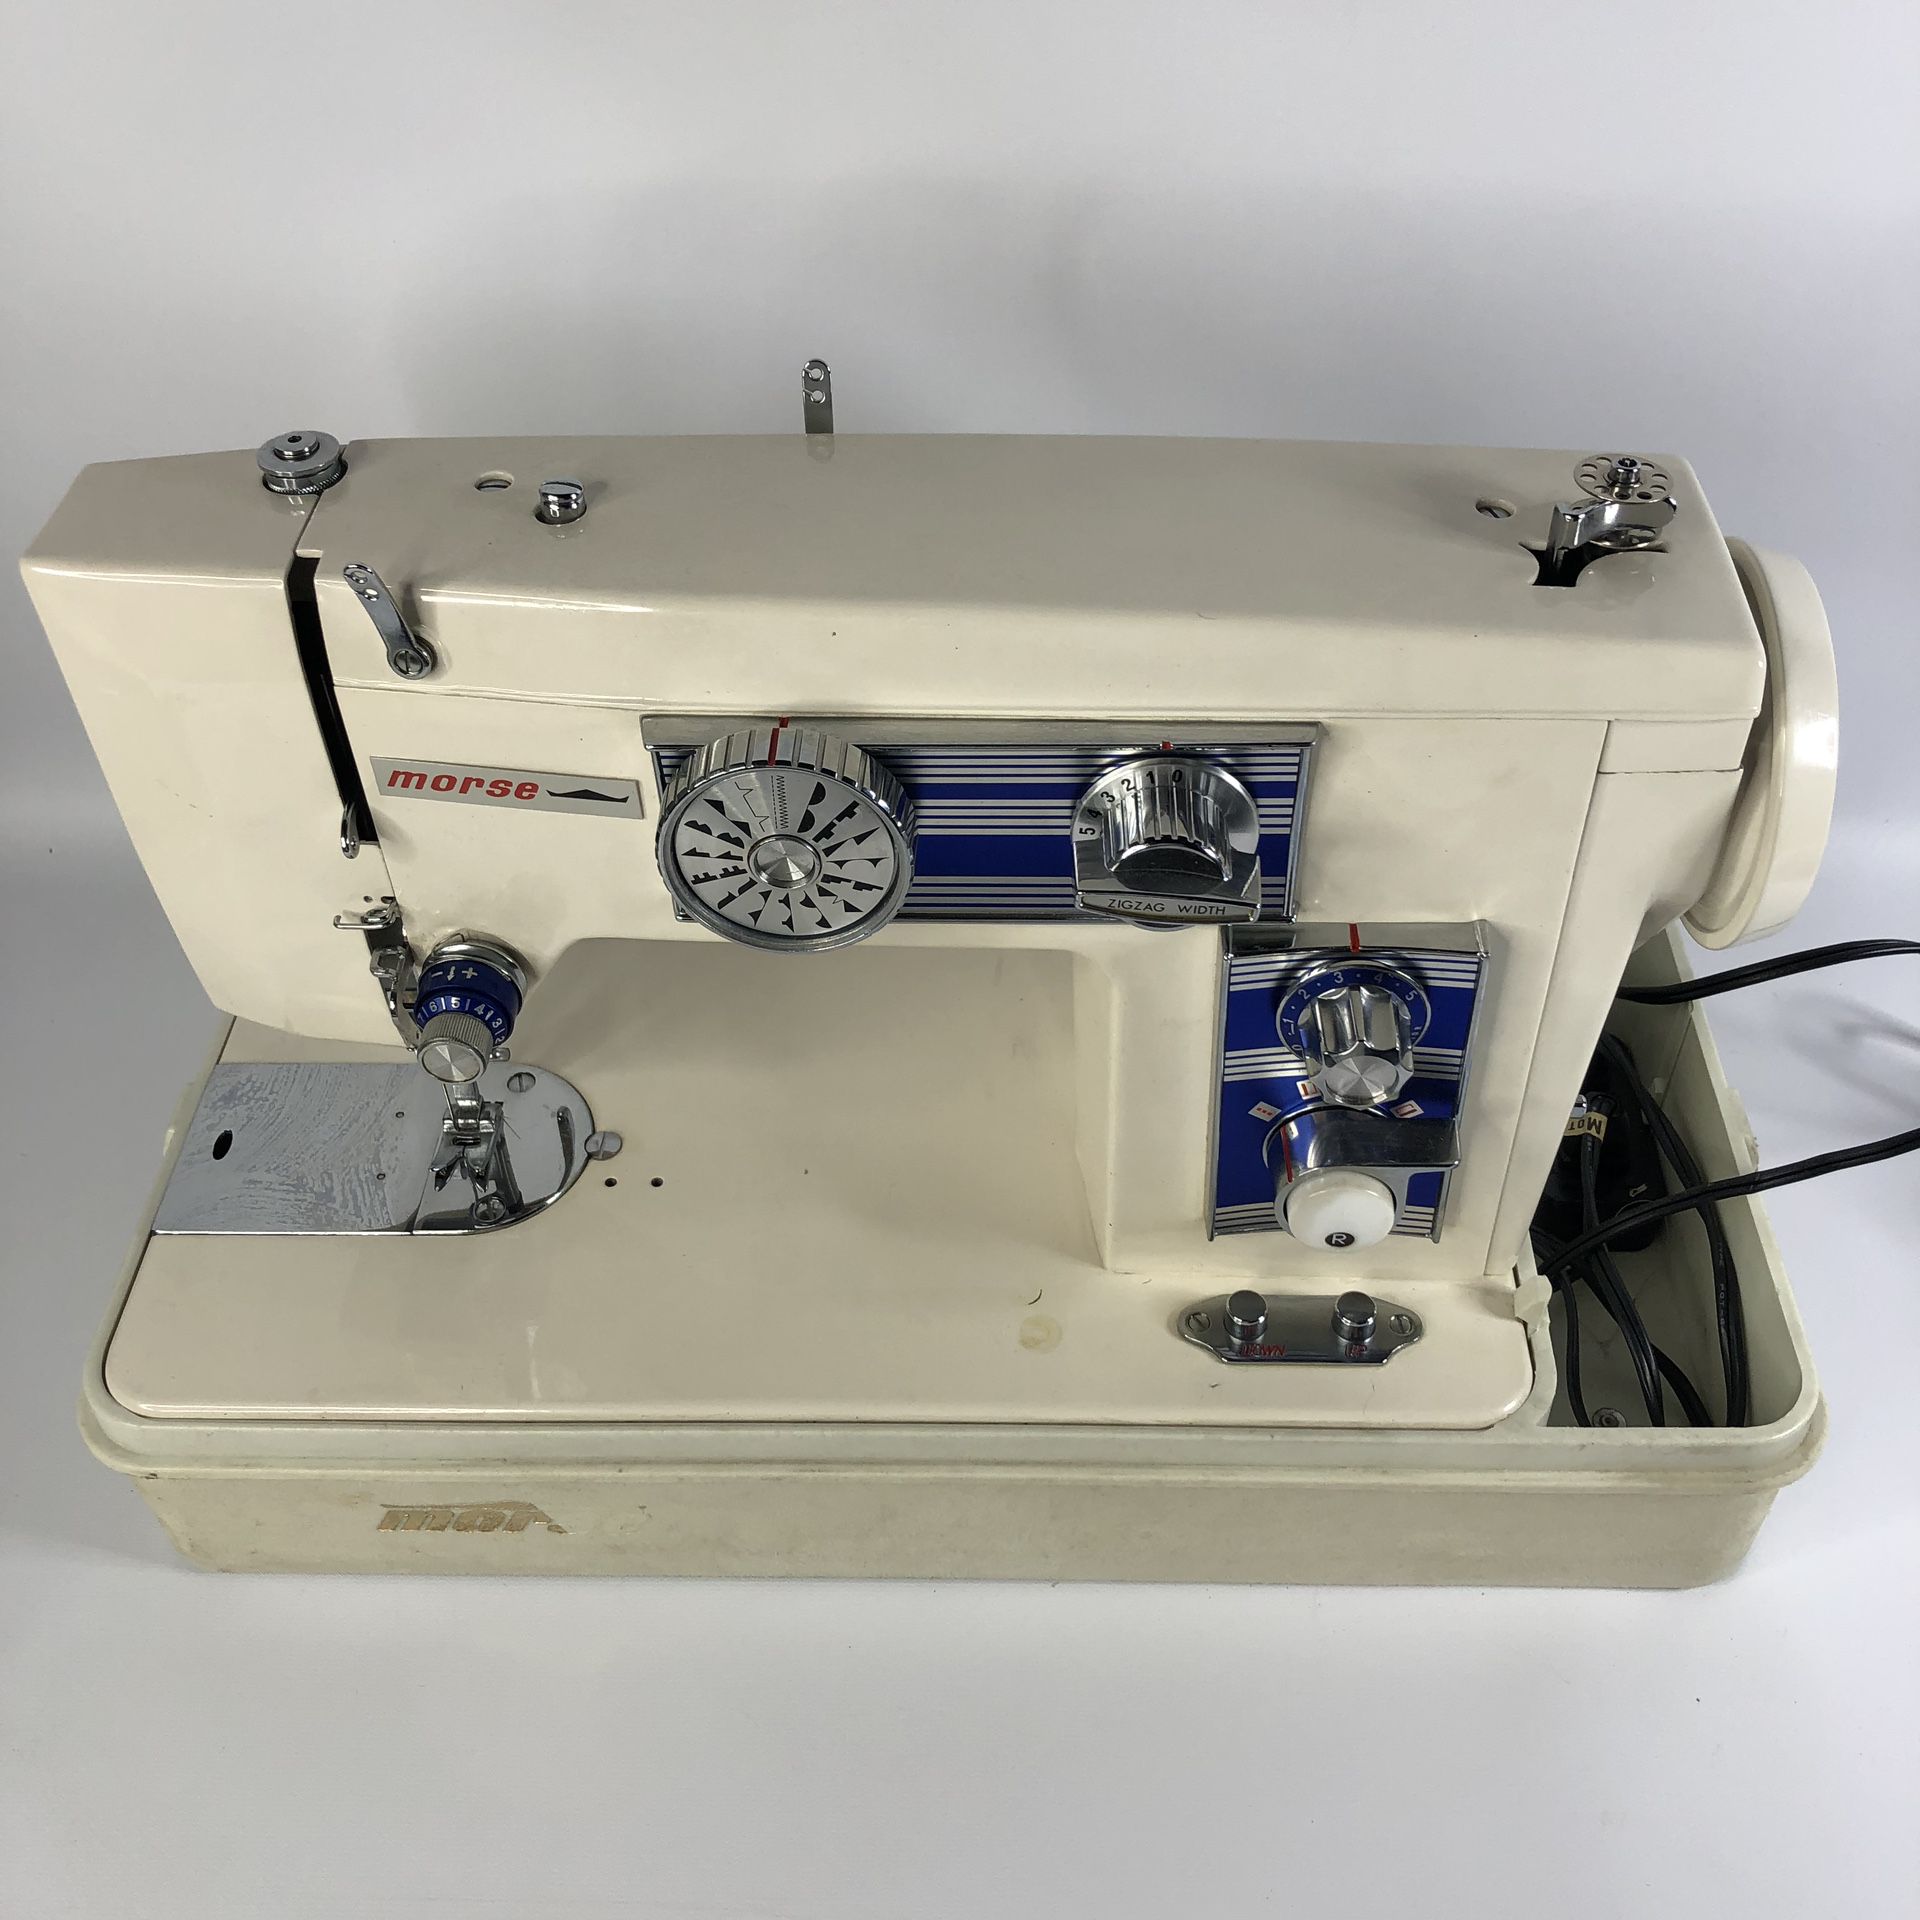 Vintage MORSE Deluxe Automatic ZigZag MODEL 3900 SEWING MACHINE W/ Case &  Manual for Sale in Vallejo, CA - OfferUp